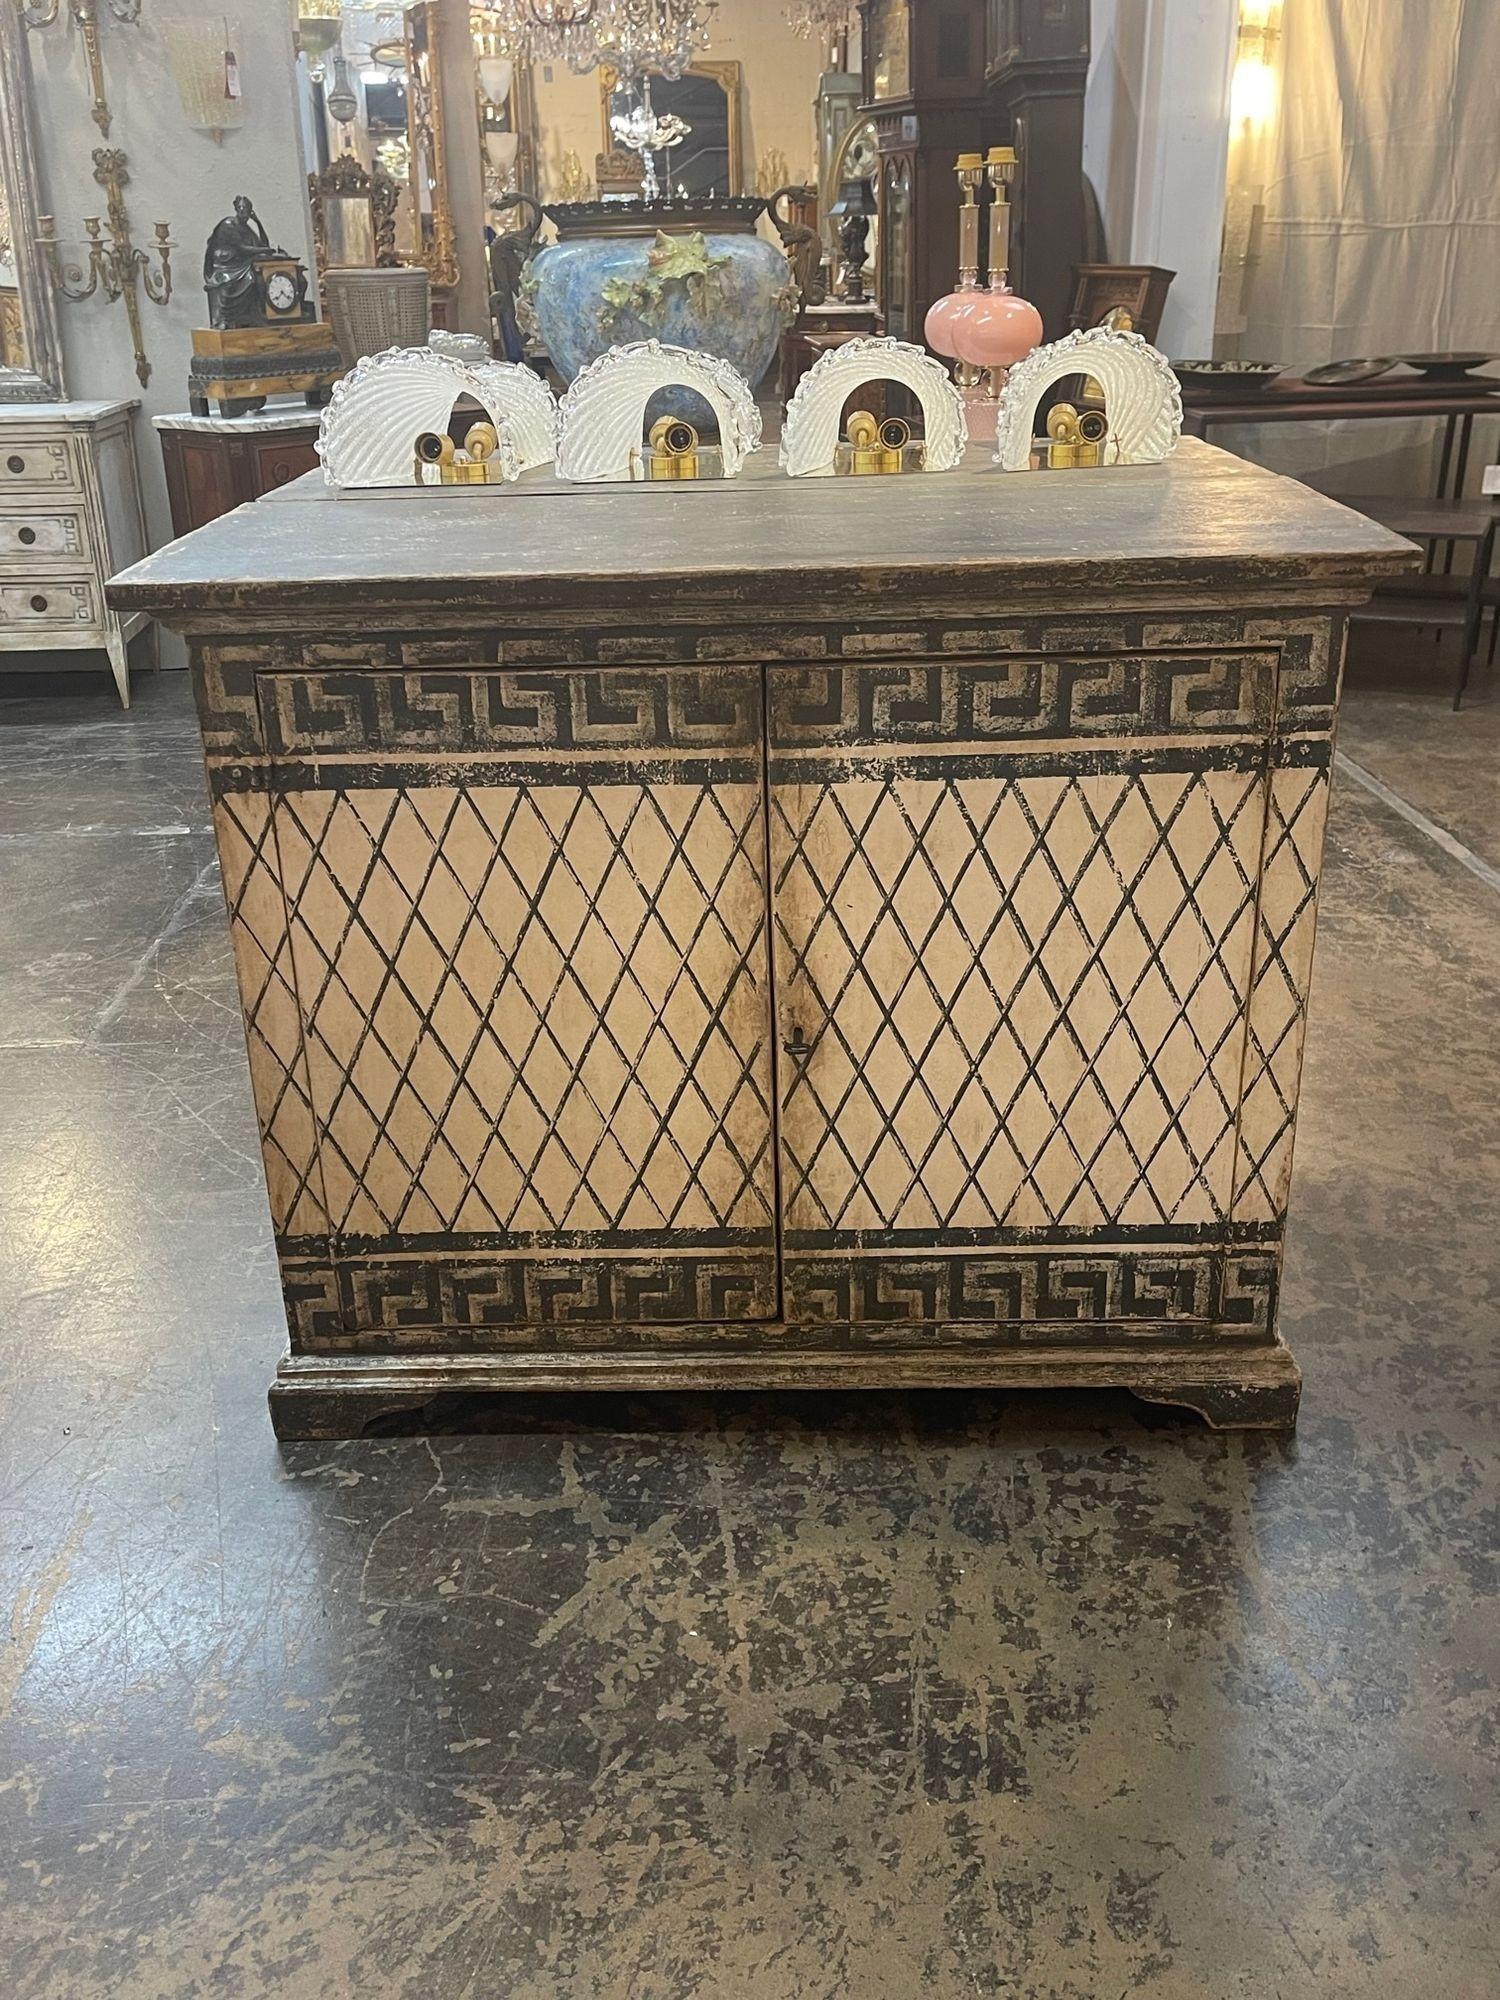 Handsome 19th century Italian painted buffets with Greek Key design. An interesting design with a beautiful patina. Lovely!